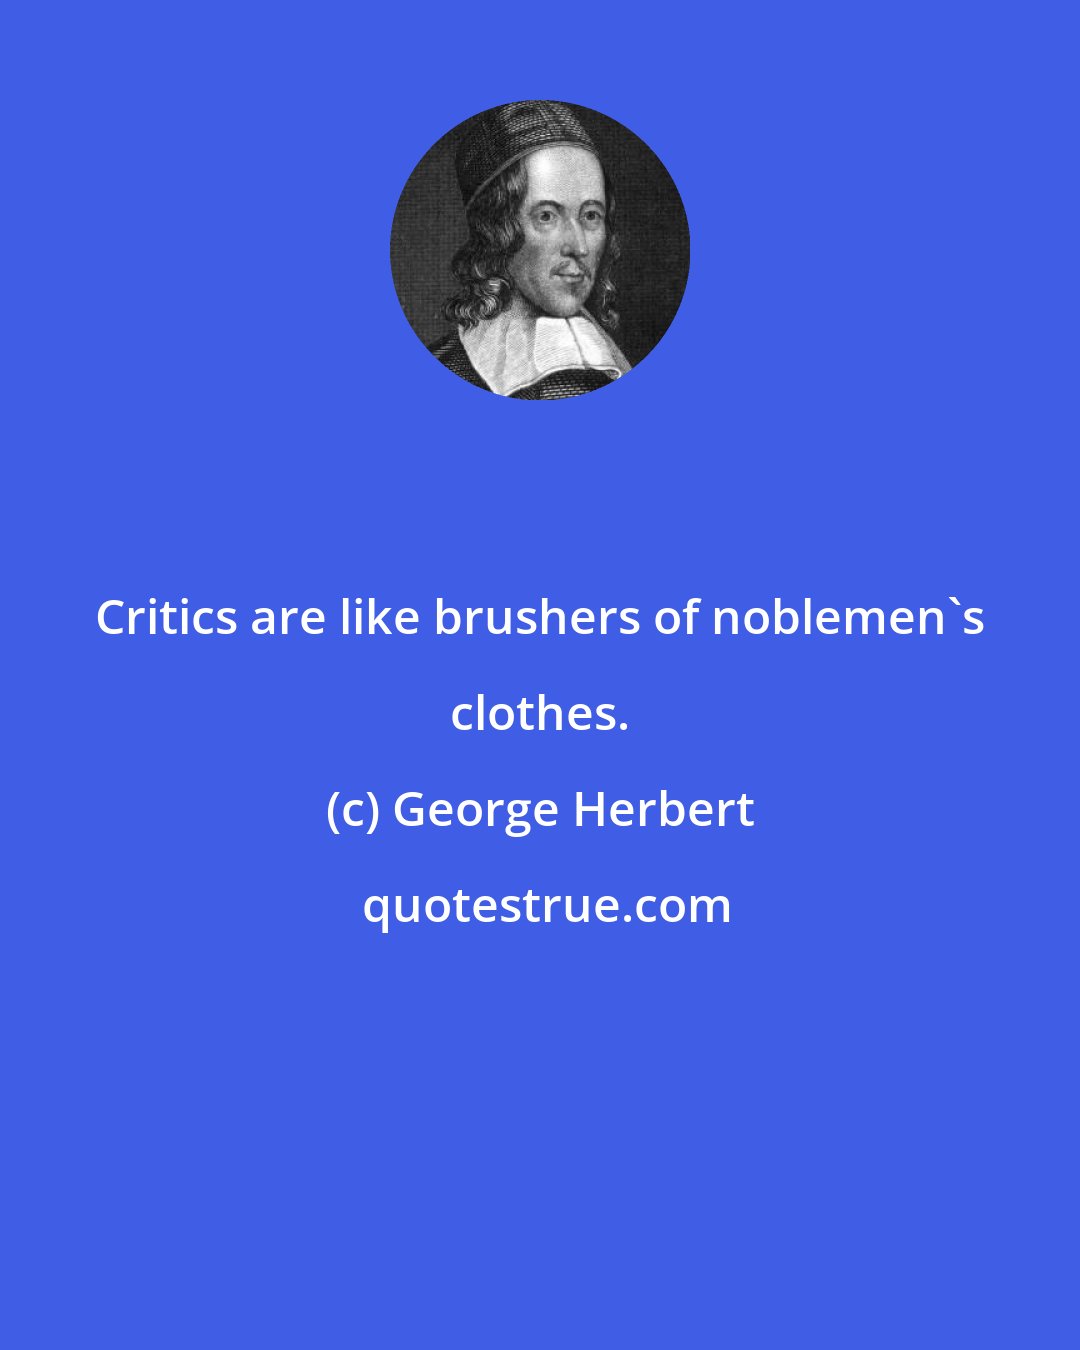 George Herbert: Critics are like brushers of noblemen's clothes.